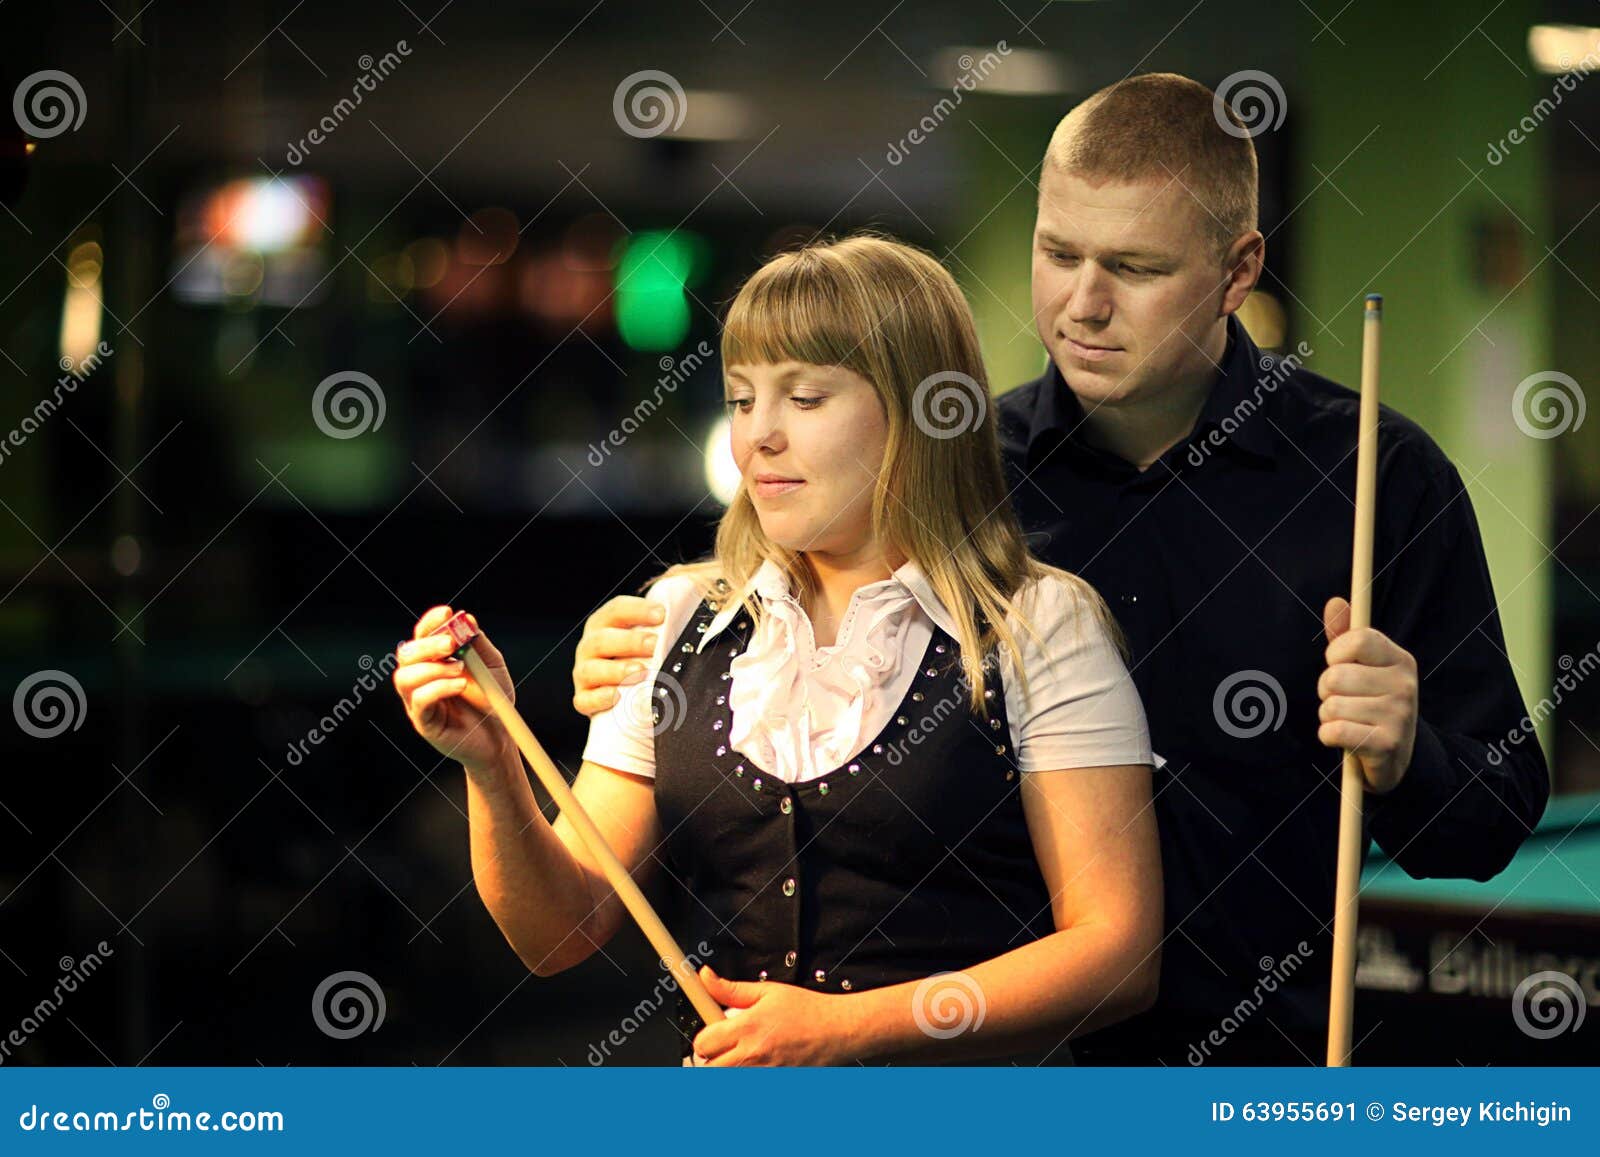 The Young Attractive Couple Plays Billiards Stock Image Image Of